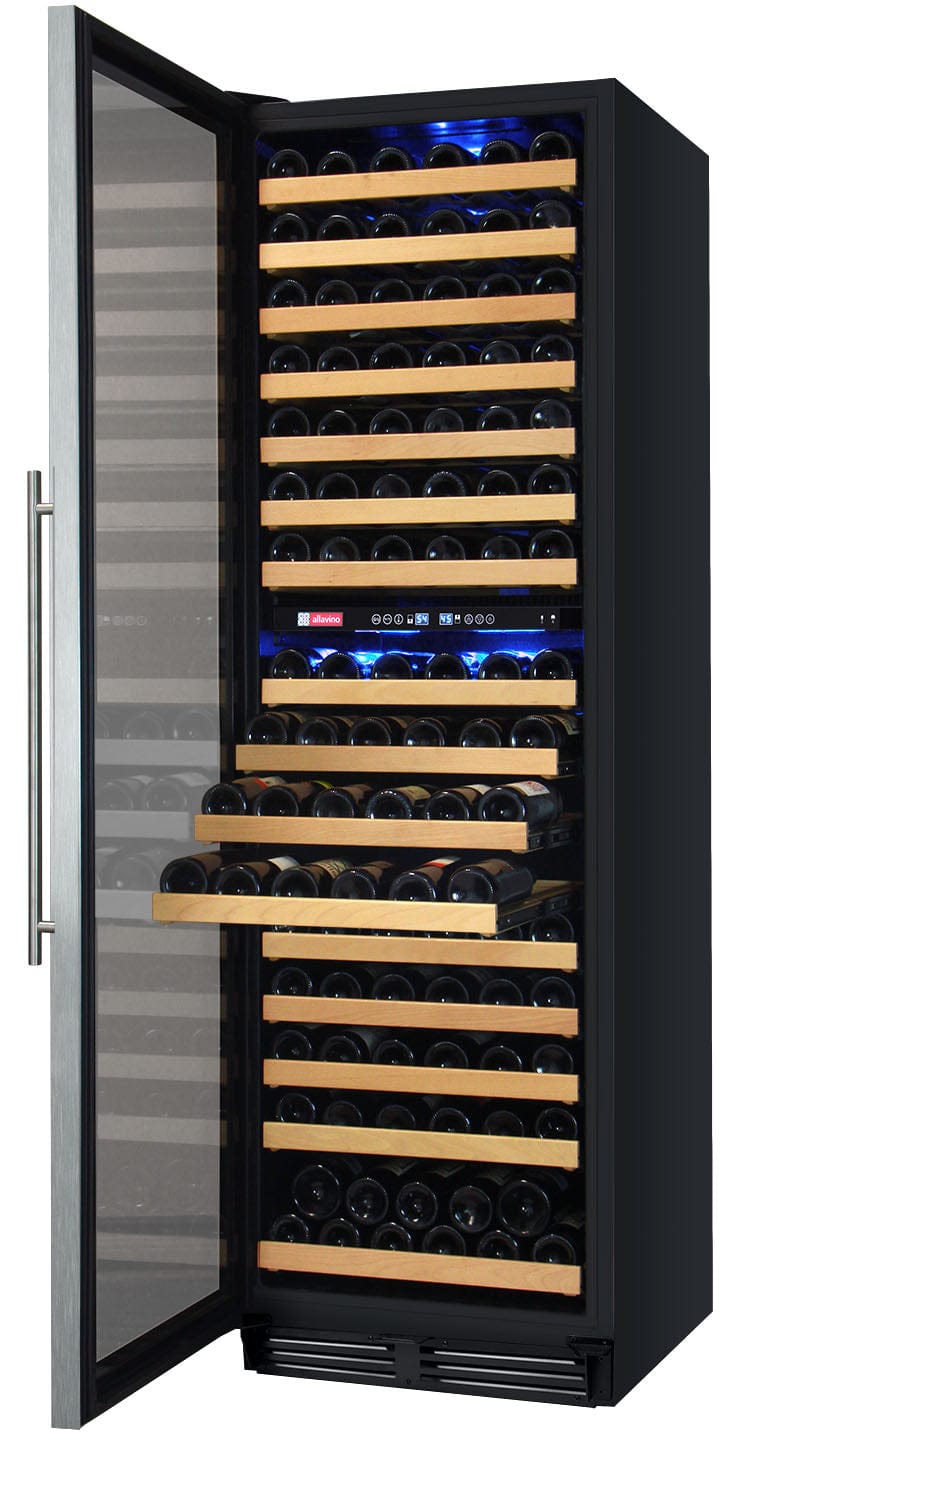 Allavino Flexcount Classic II 172 Bottle Dual Zone 24 Inch Wide Wine Cooler facing left with door half opened and two shelves out full of wine bottles.